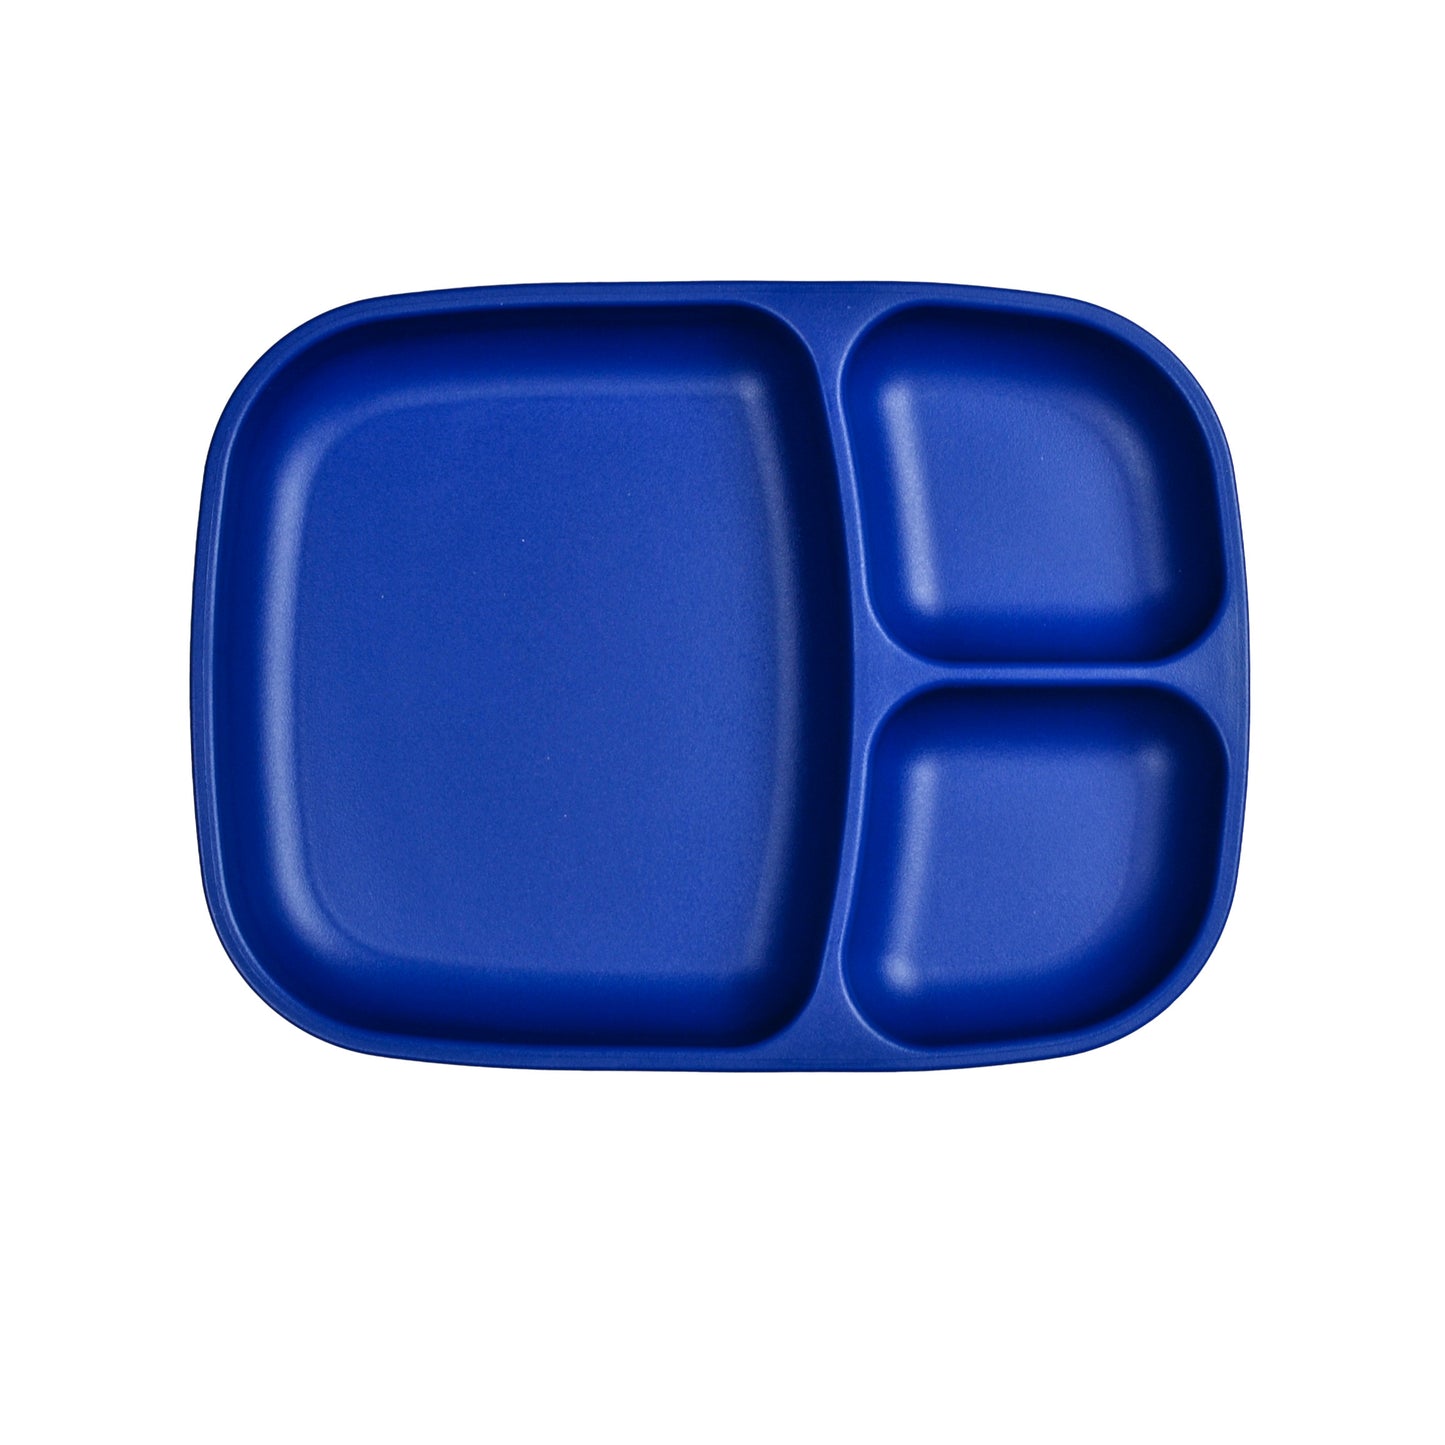 Re-Play Large Divided Plate - Navy Blue